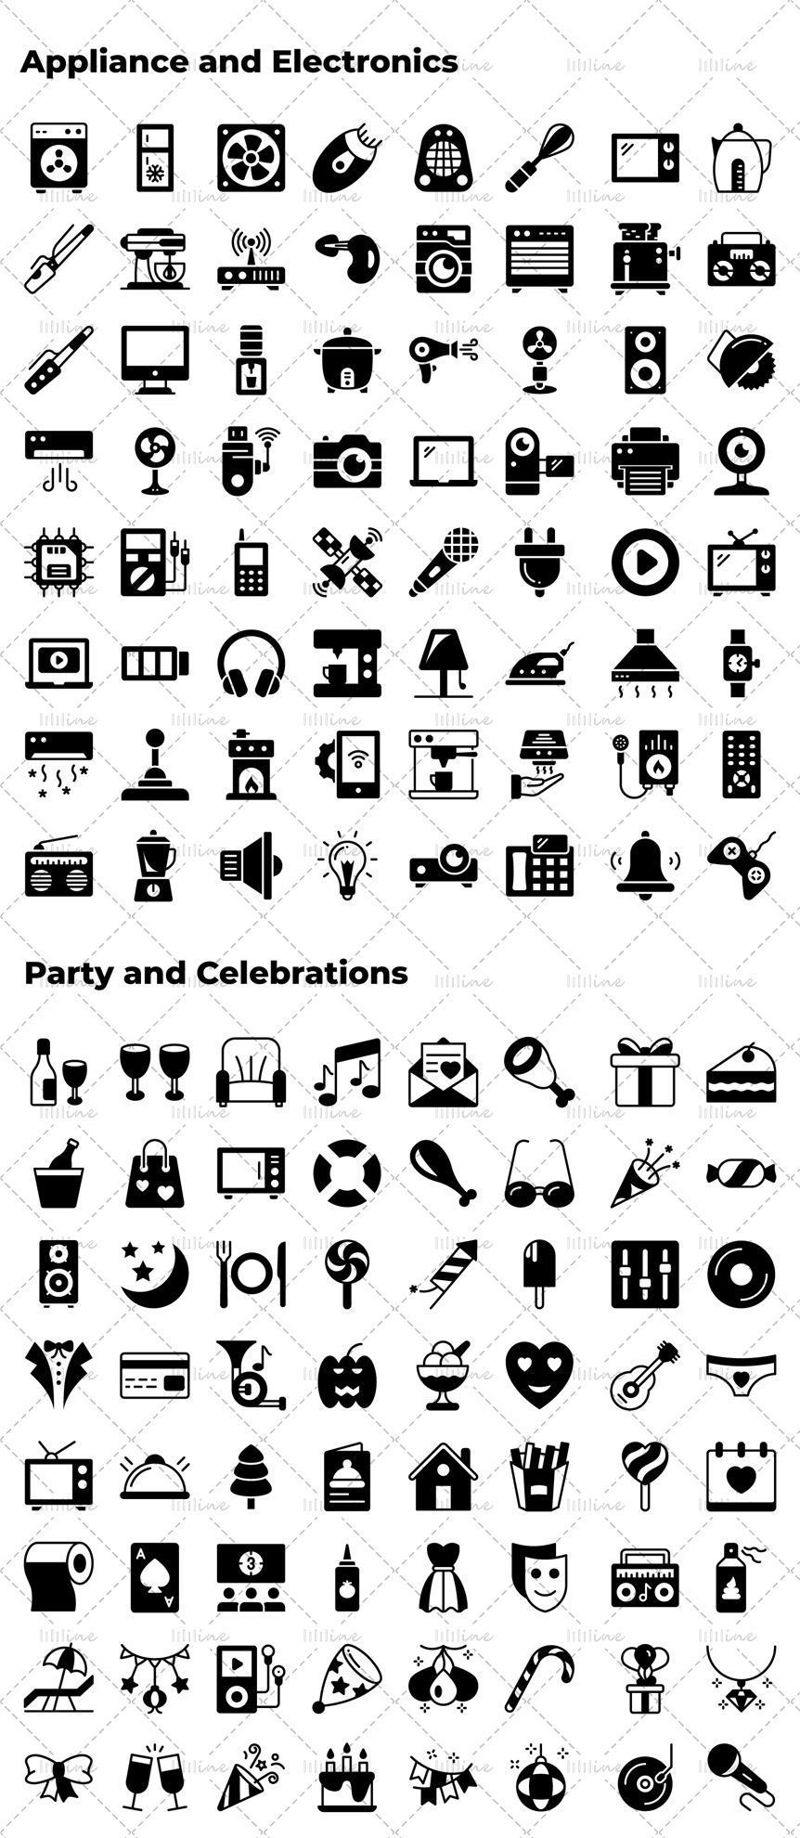 Appliance electronics, party celebrations vector icon